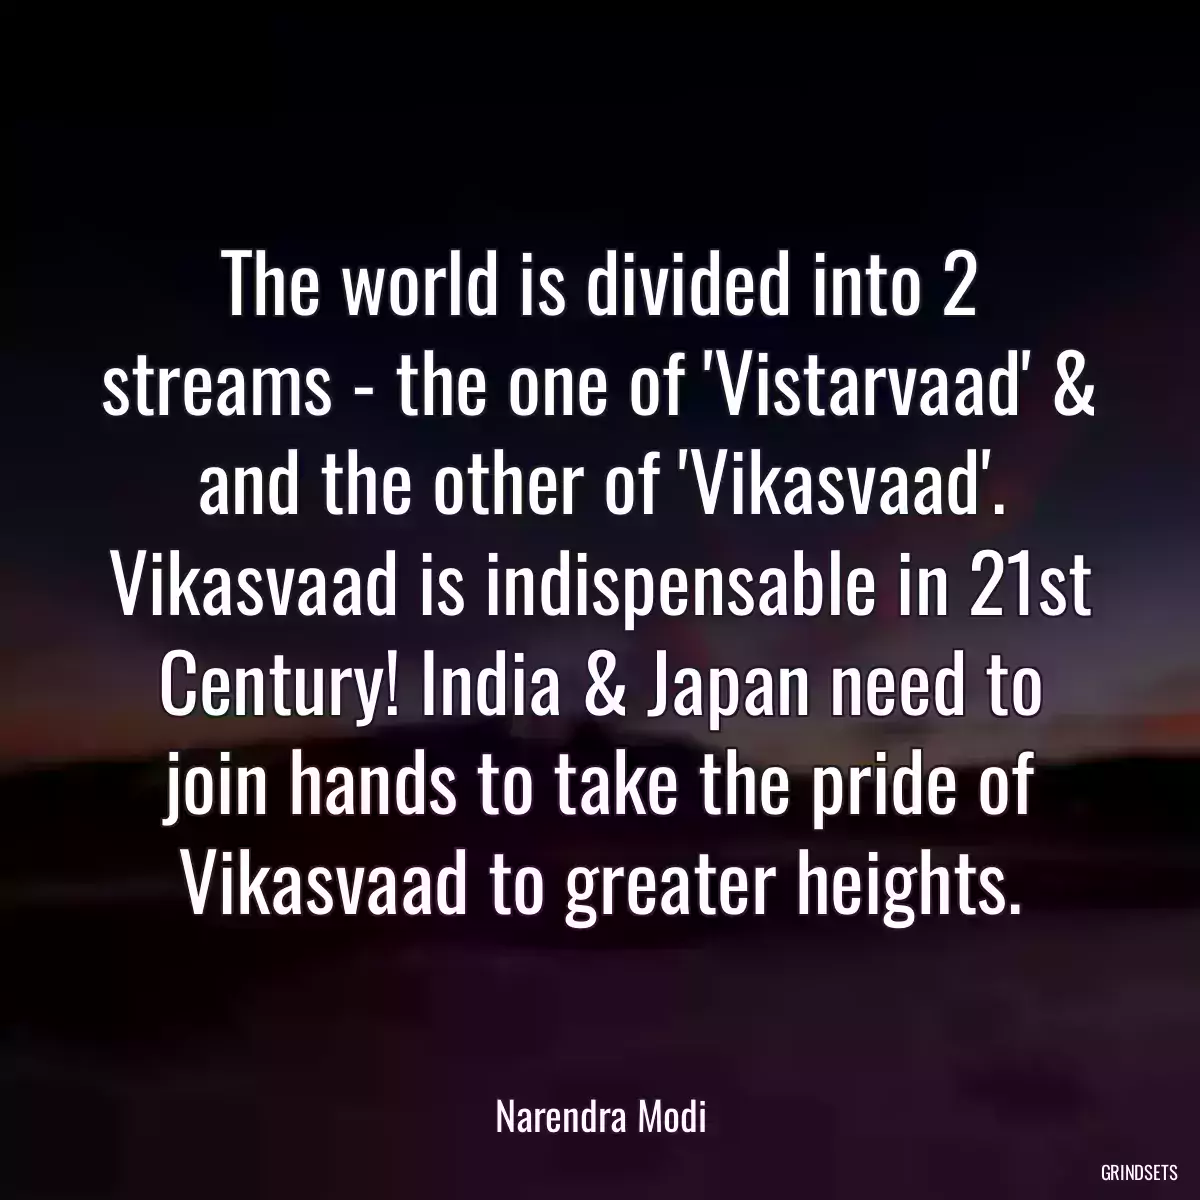 The world is divided into 2 streams - the one of \'Vistarvaad\' & and the other of \'Vikasvaad\'. Vikasvaad is indispensable in 21st Century! India & Japan need to join hands to take the pride of Vikasvaad to greater heights.